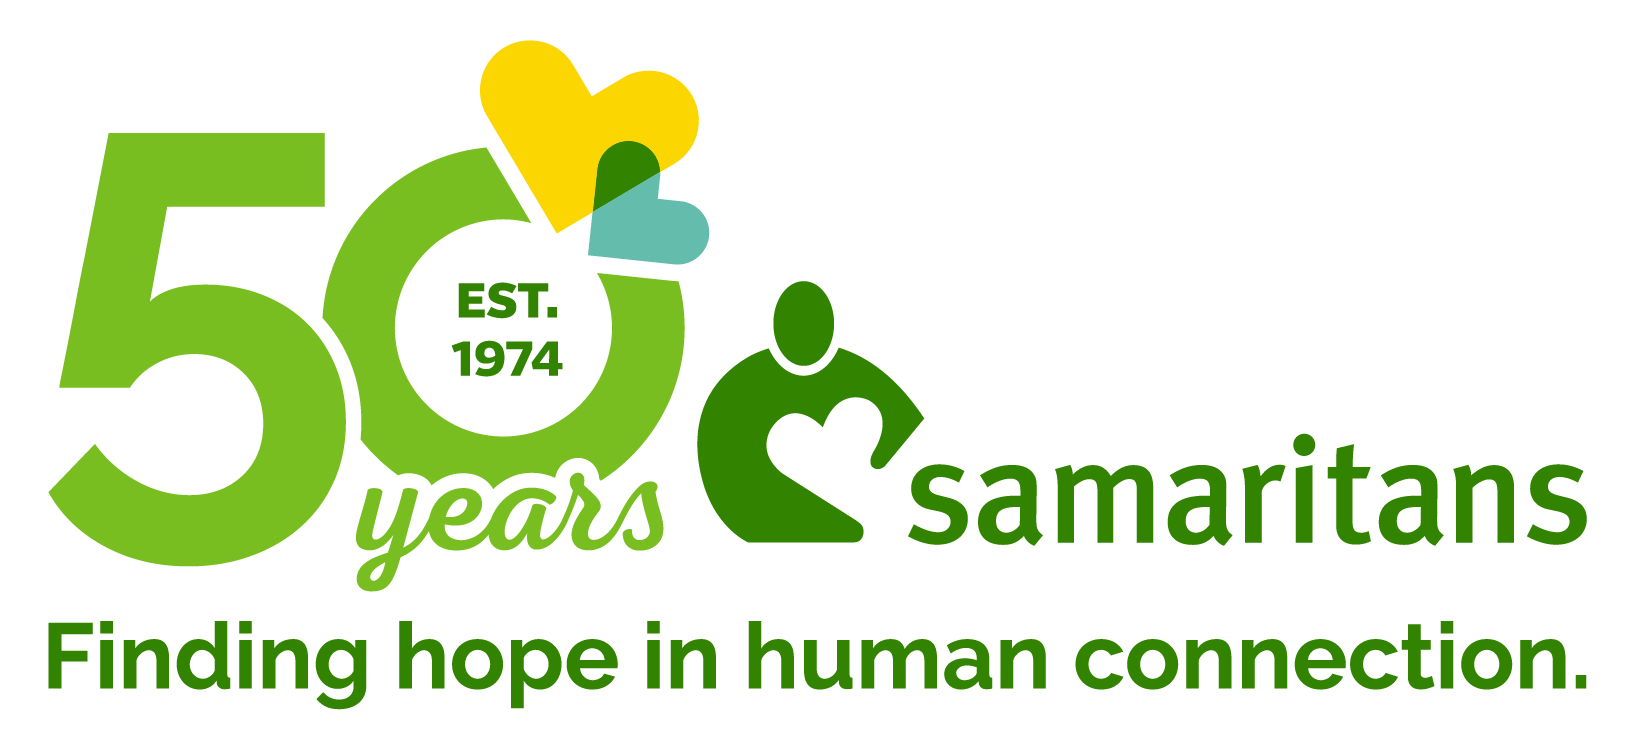 Samaritans 50th anniversary logo with tagline finding hope in human connection